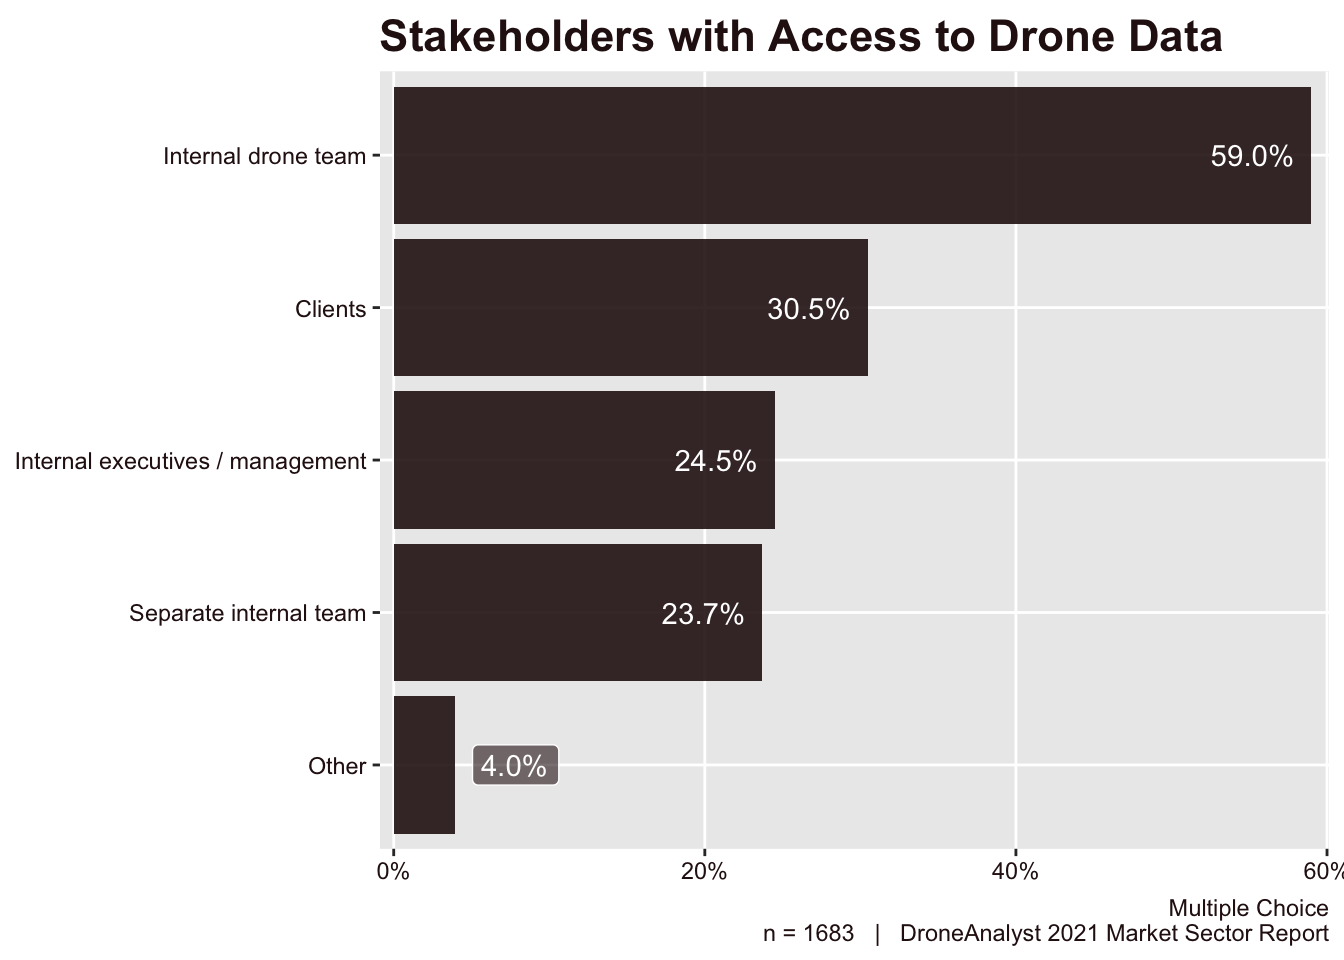 Stakeholders with Access to Drone Data